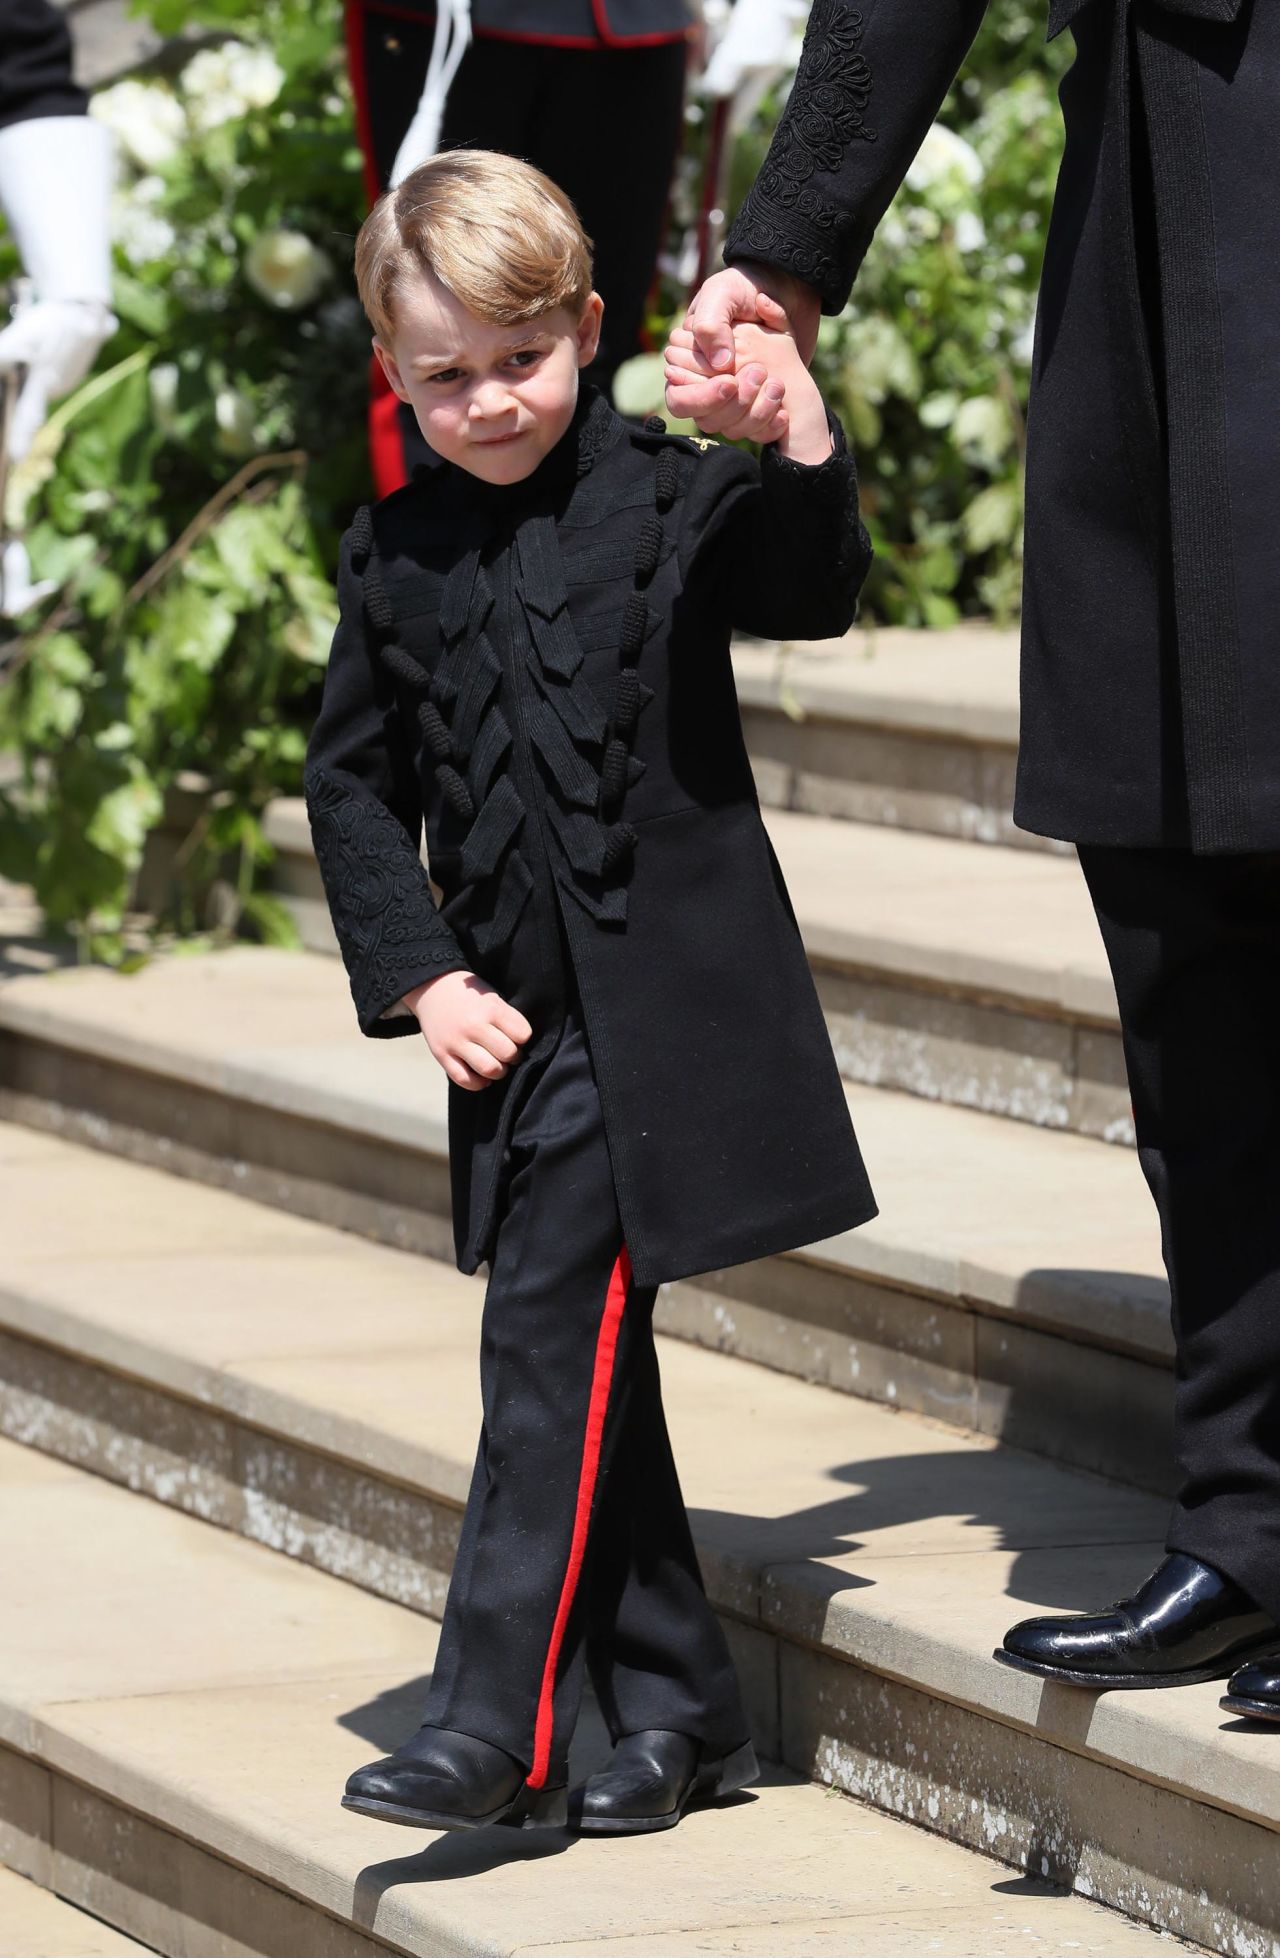 Prince George leaves the chapel after the wedding of his uncle, Prince Harry, in May 2018.